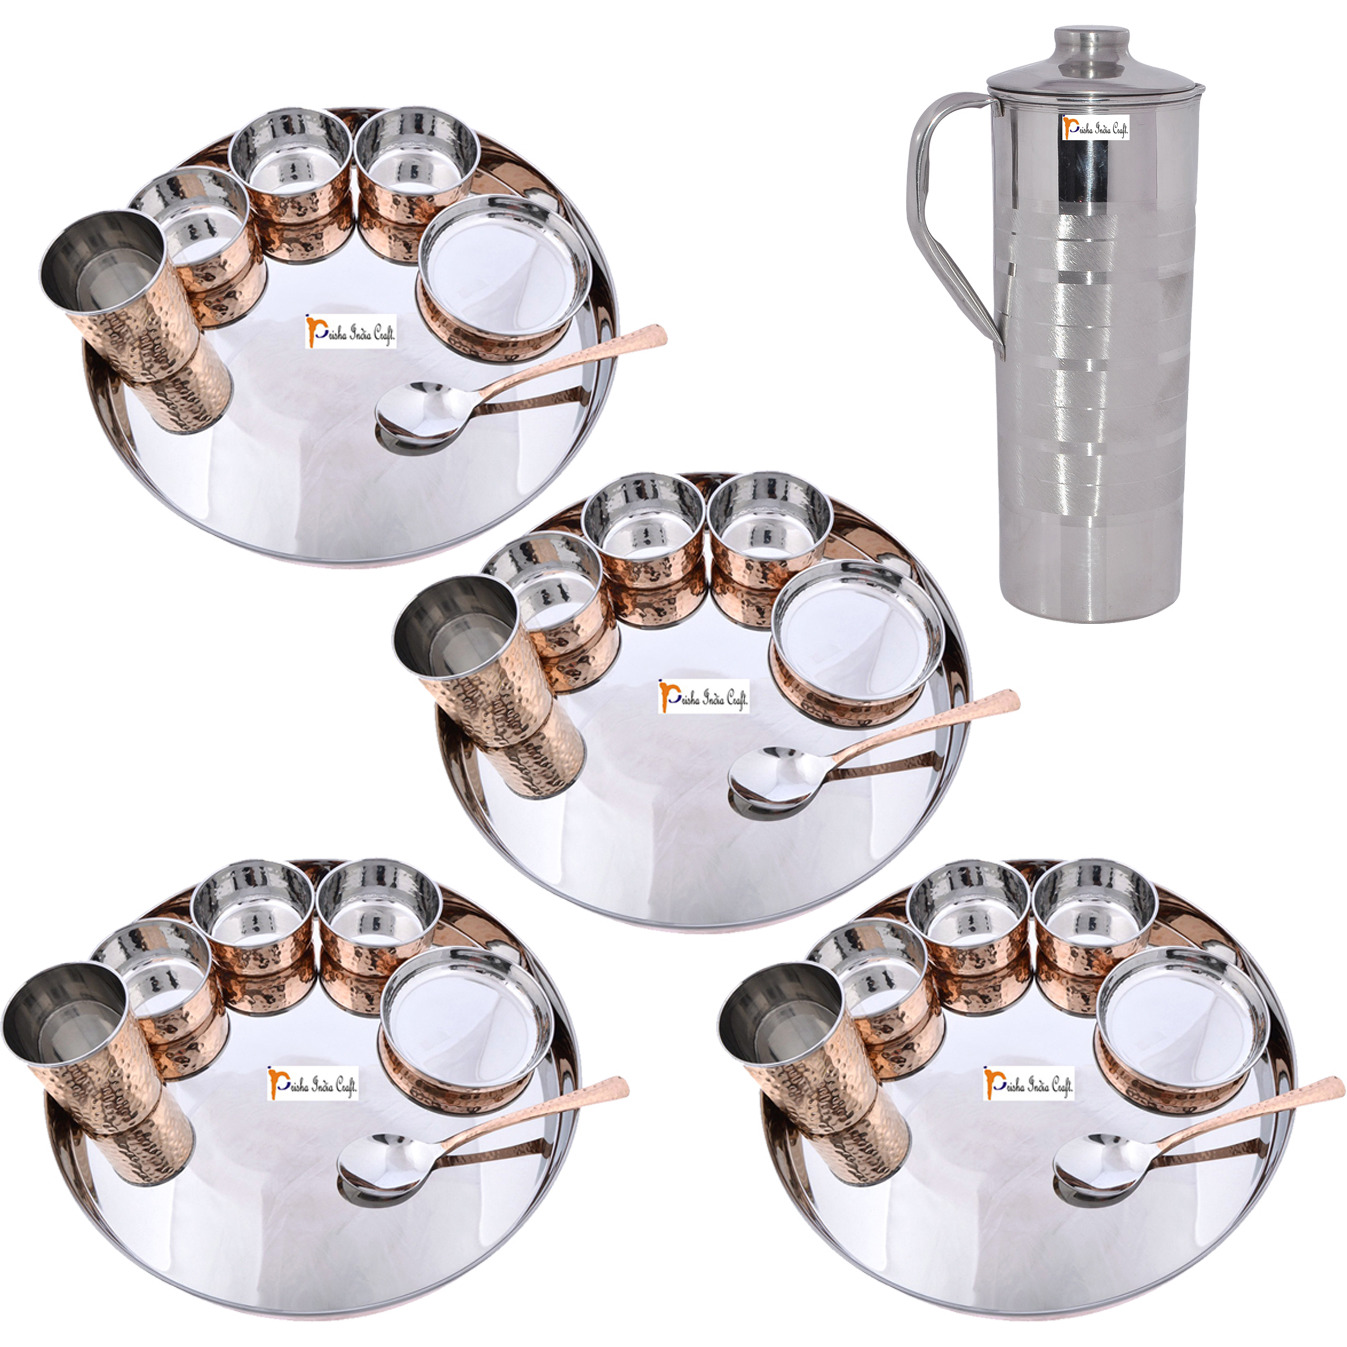 Prisha India Craft B. Set of 4 Dinnerware Traditional Stainless Steel Copper Dinner Set of Thali Plate, Bowls, Glass and Spoon, Dia 13  With 1 Luxury Style Stainless Steel Copper Pitcher Jug - Christmas Gift